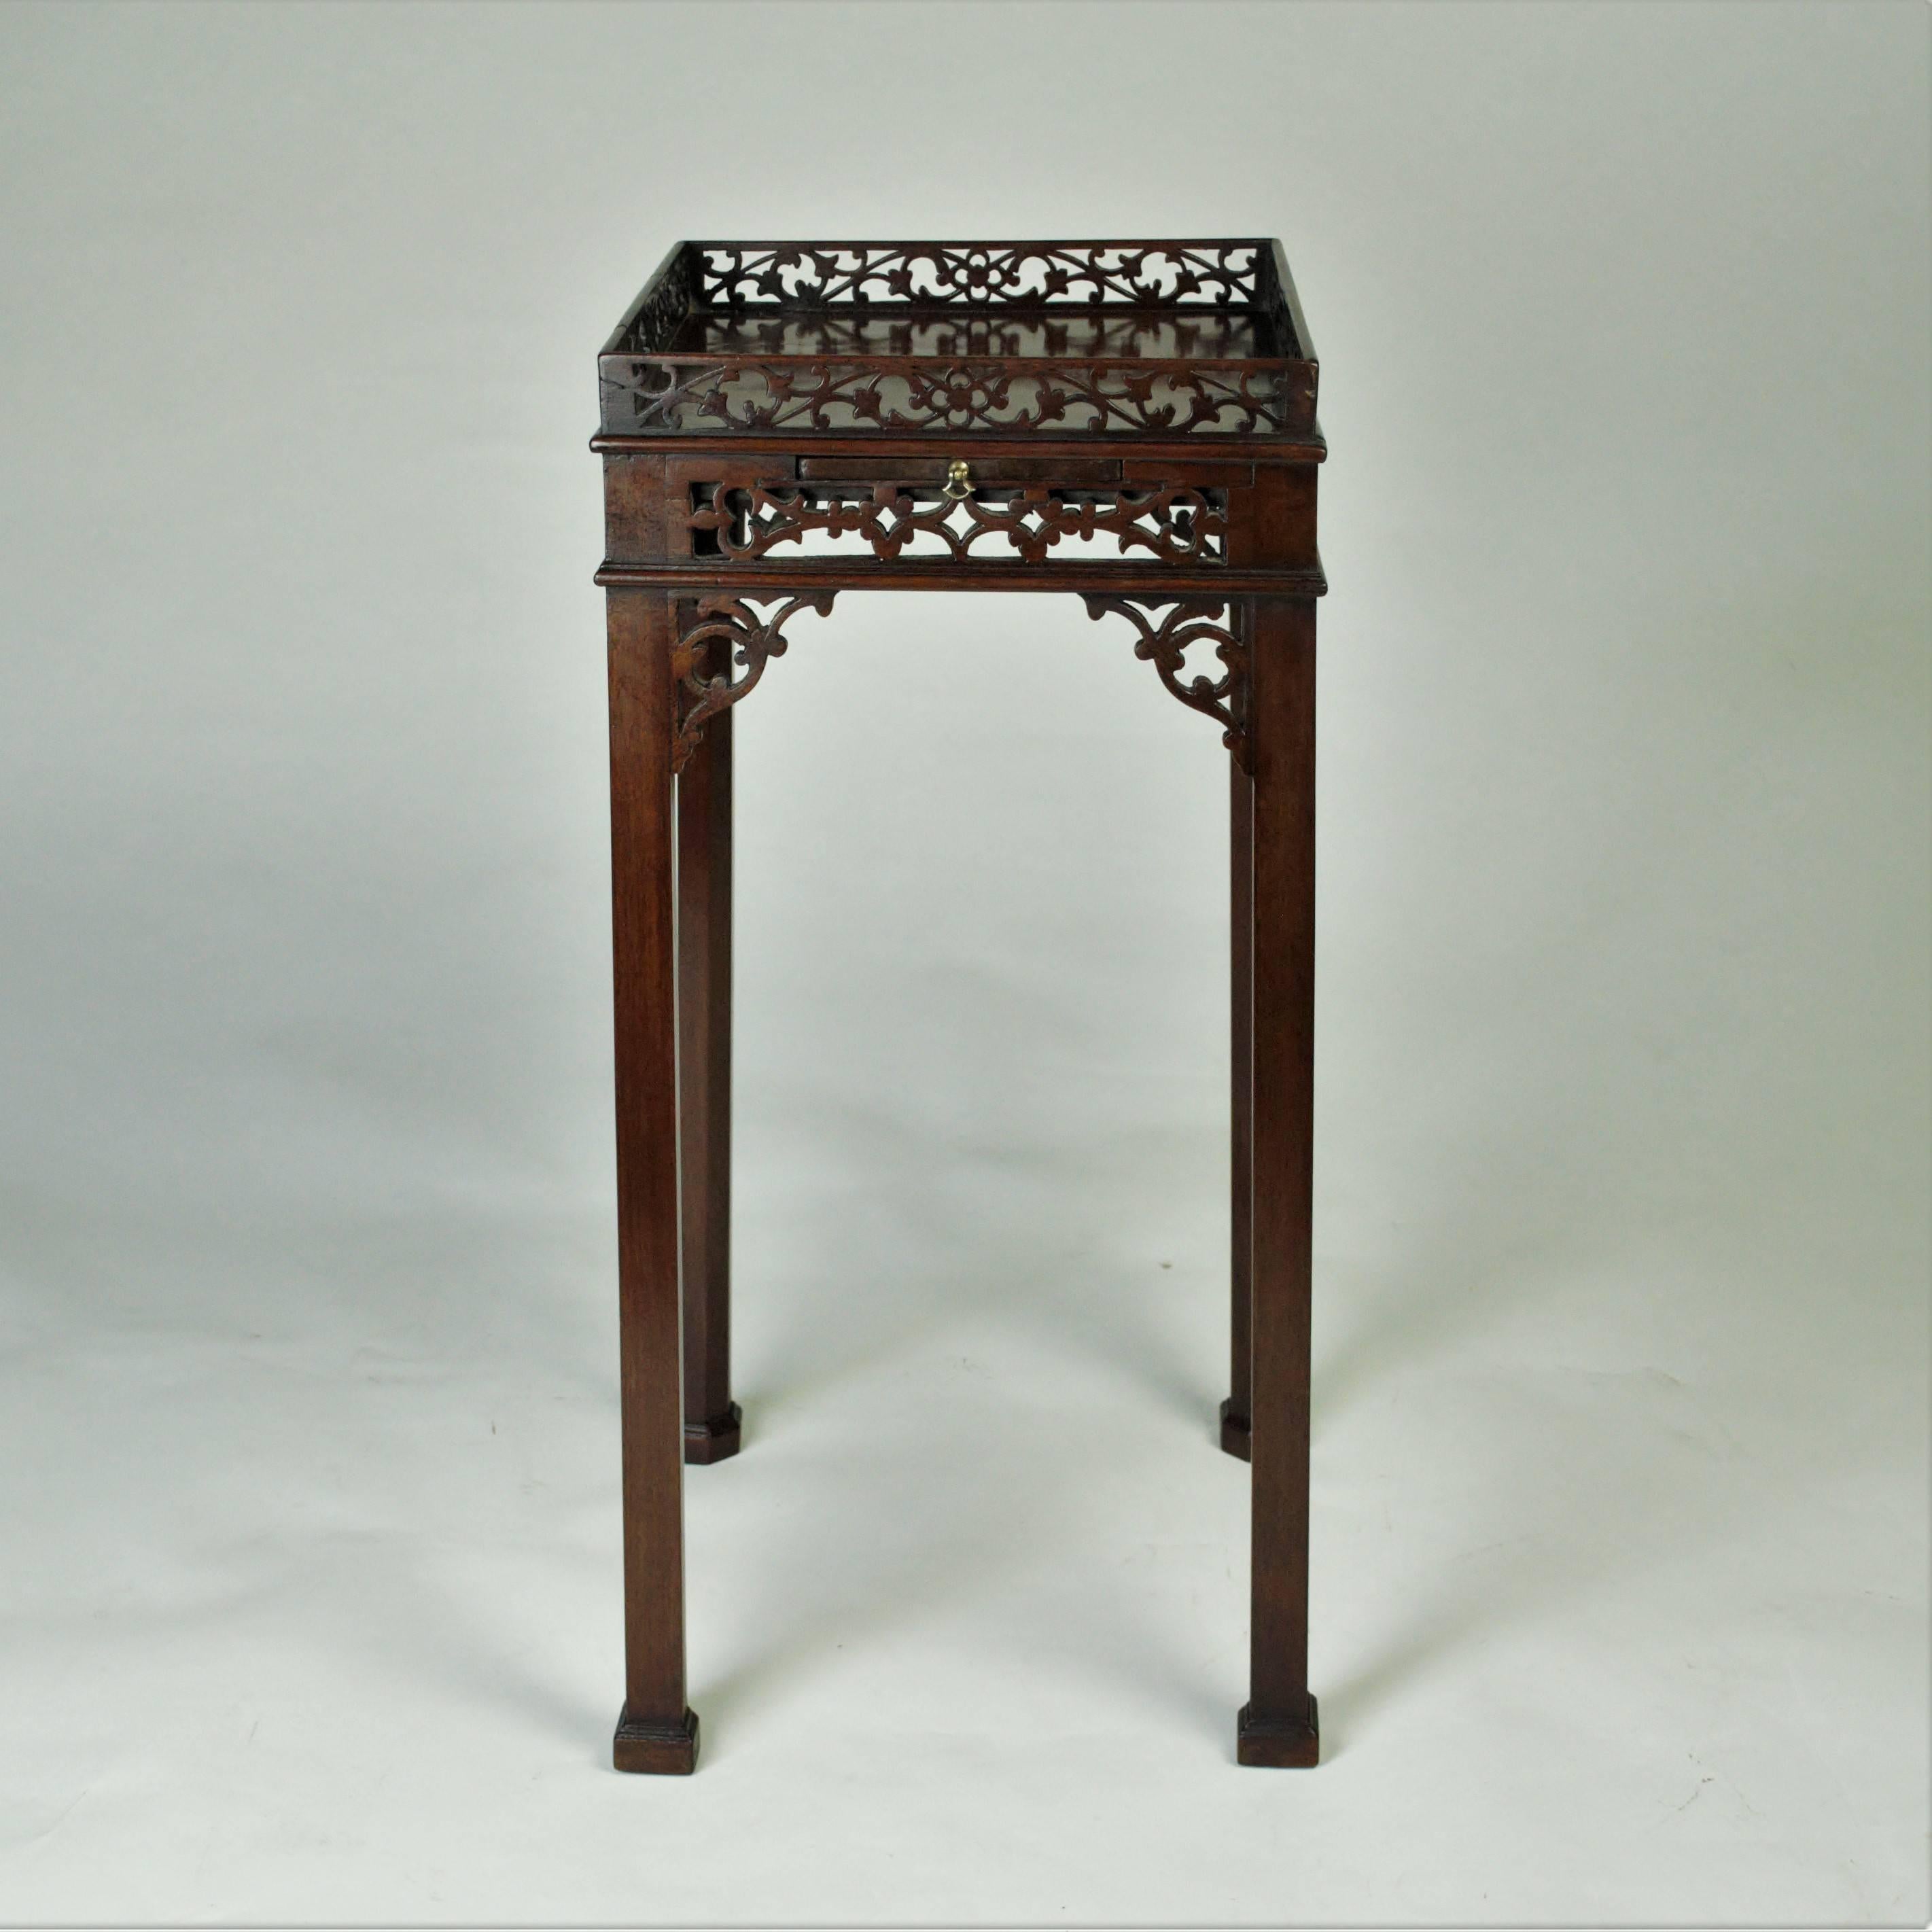 A fine quality Chippendale inspired and unusual mahogany Urn or Kettle Stand of square form with open-fret galleried top and apron set with a cup slide in the front, and standing on elegant chamfered legs with block toes and joined by a turned 'X'